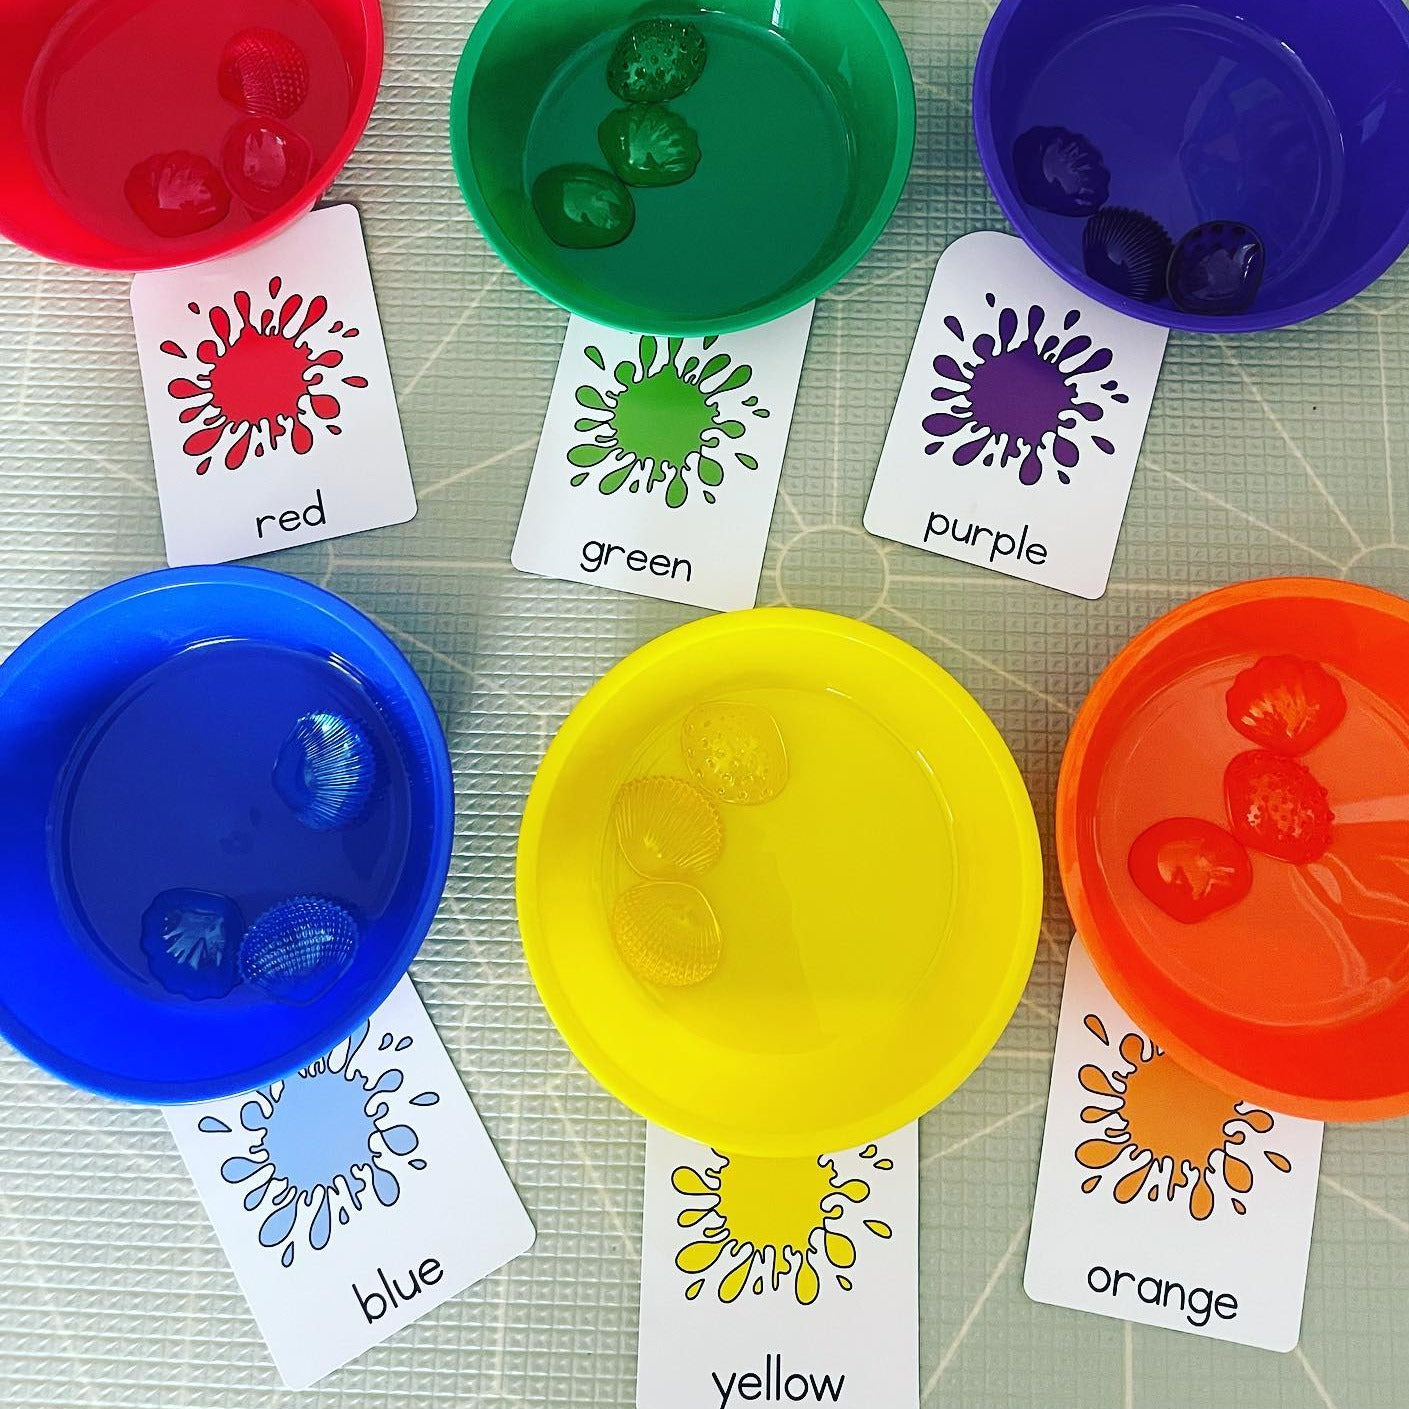 Plastic Rainbow Colour Sorting Bowls 6pk, The Rainbow Colour Sorting Bowls are a must-have addition to any classroom or home. This set of brightly coloured bowls is made from sturdy plastic, ensuring durability and longevity.Ideal for various educational activities, these sorting bowls are perfect for sorting and counting exercises. Children can use them to sort objects by color or size, helping to develop their cognitive and fine motor skills. The bowls are also a great tool for teaching early math concept